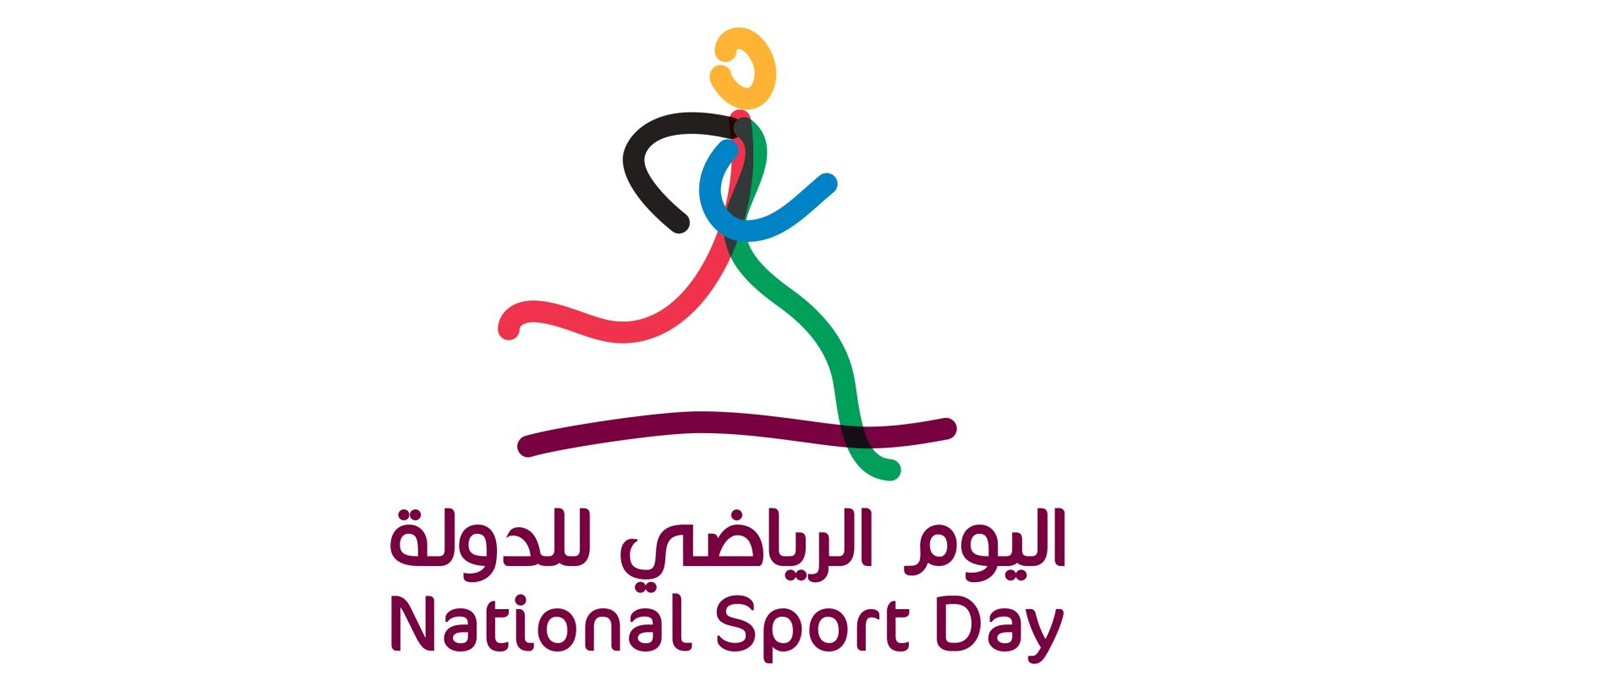 The National Sports Day